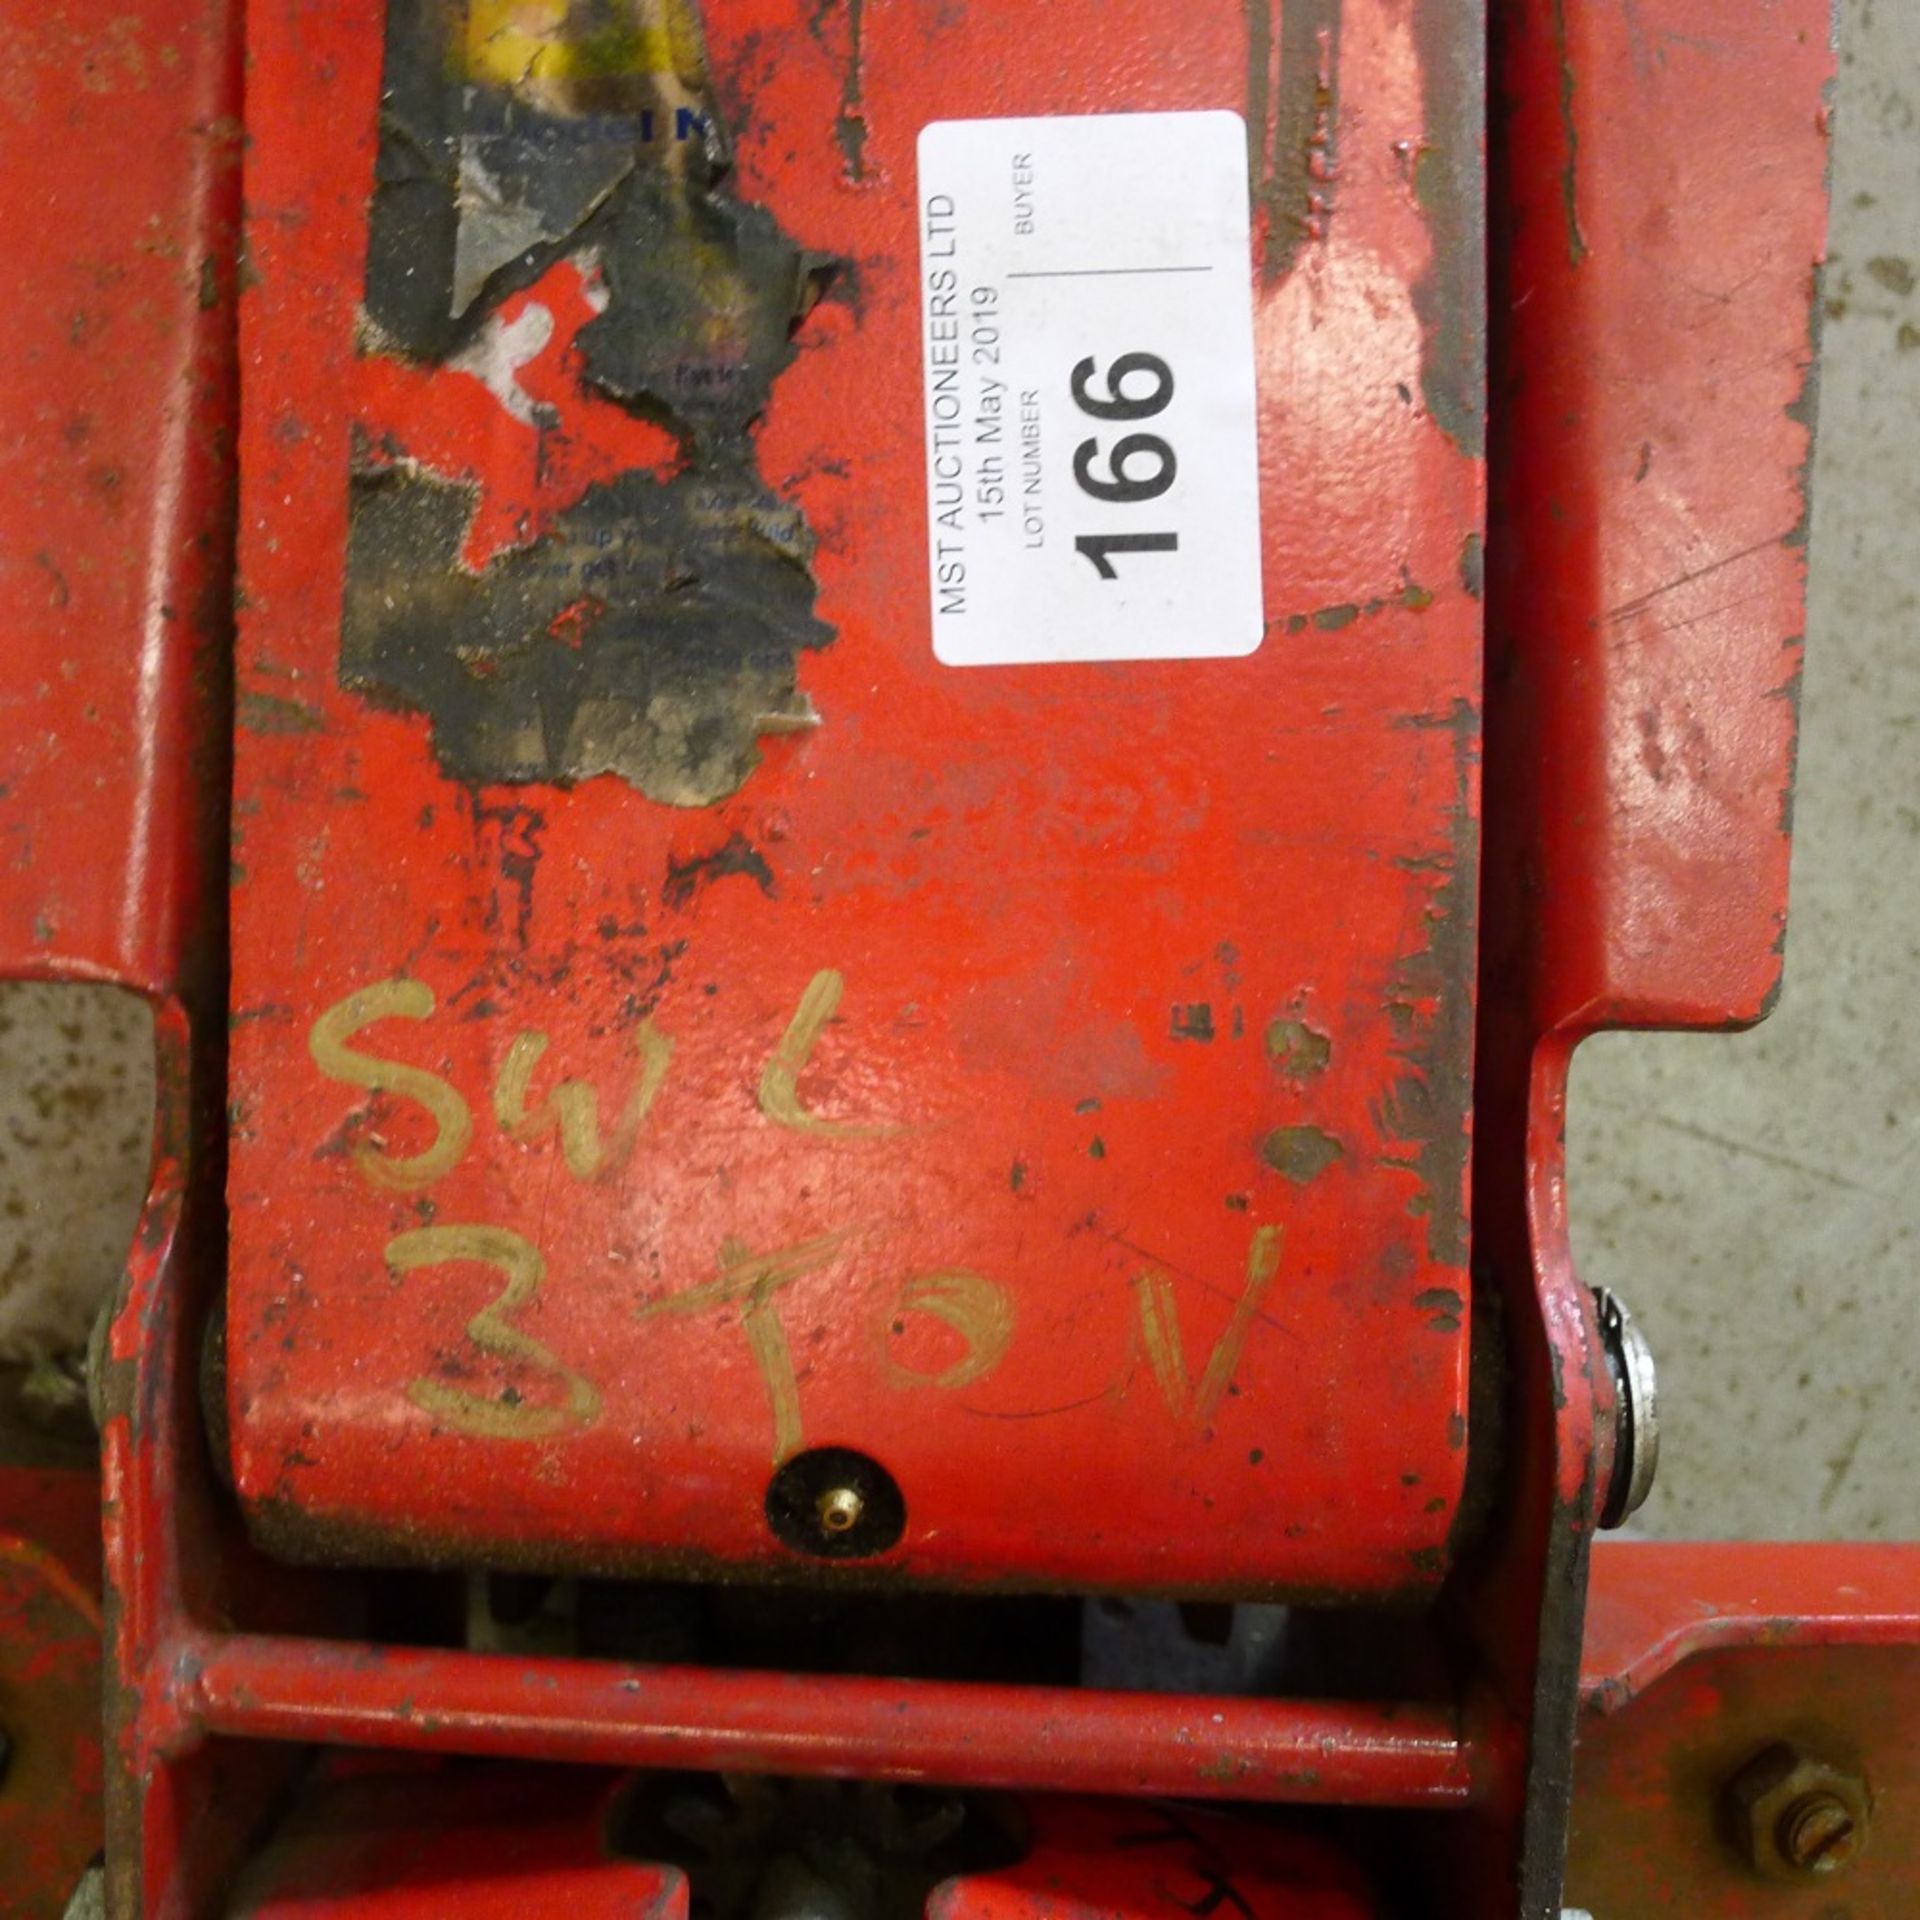 1 trolley jack believed to be 3 ton capacity – no make visible - Image 2 of 2